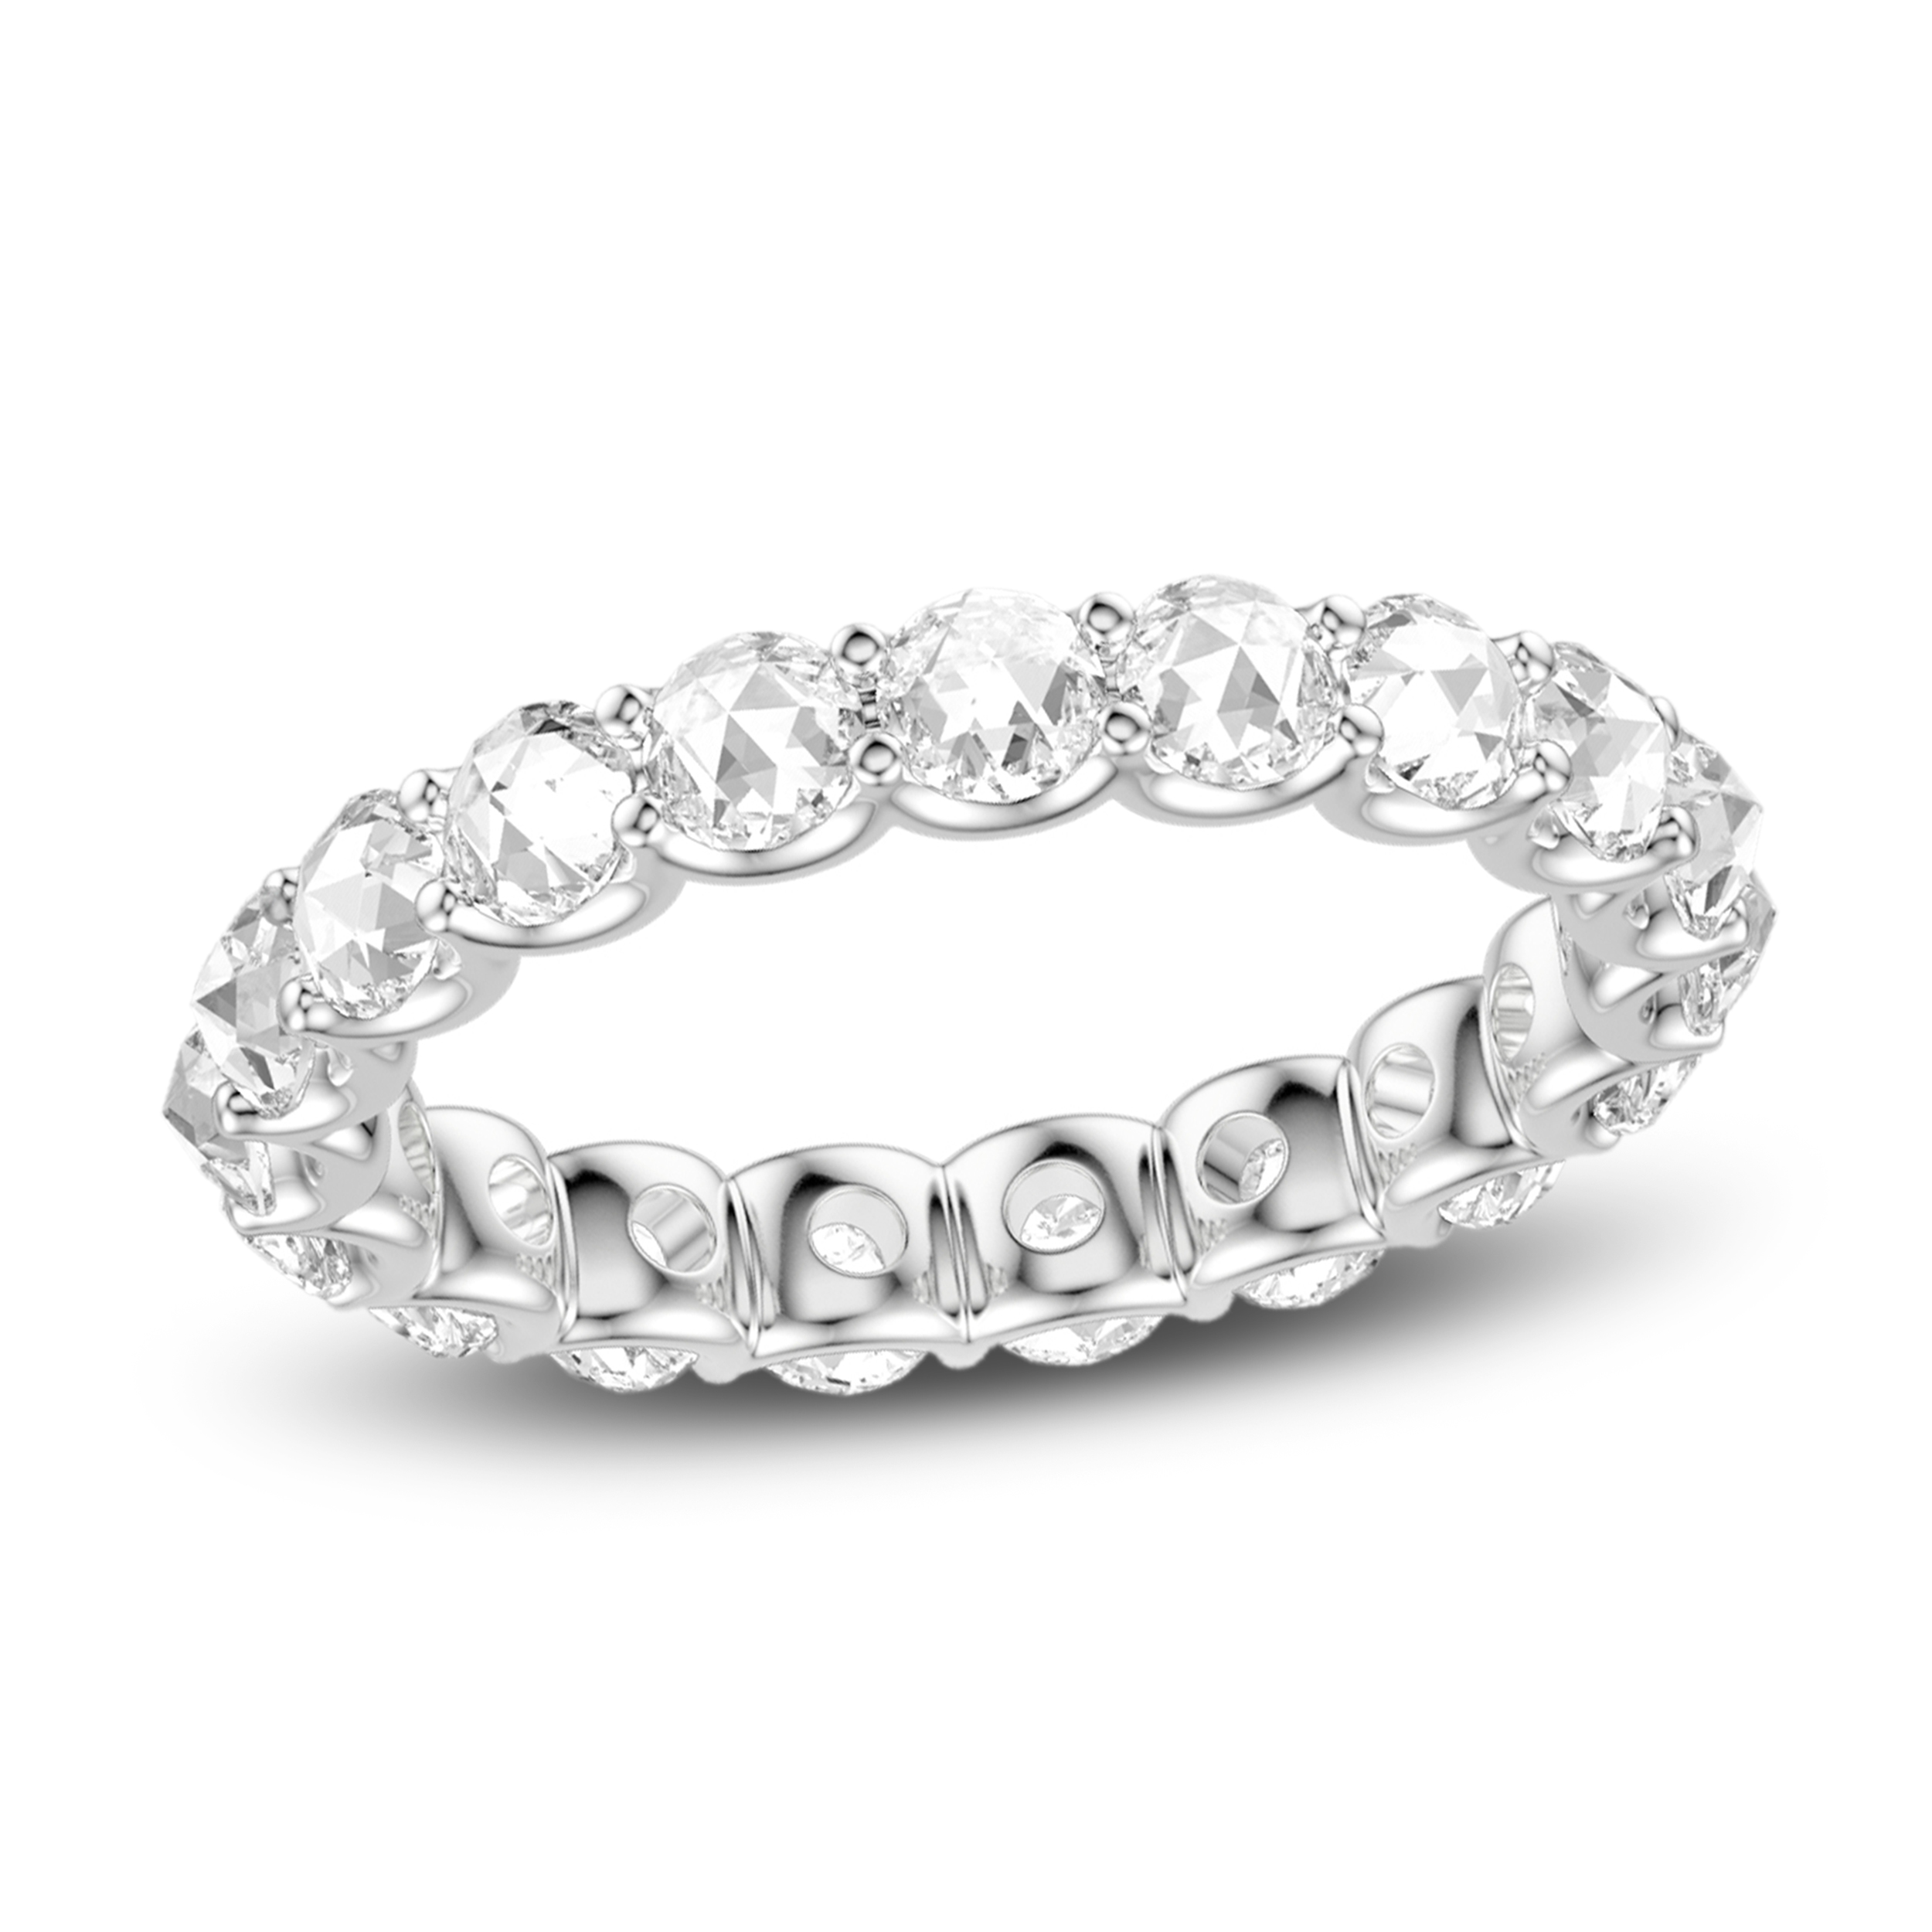 ArtCarved Rose-Cut Diamond Eternity Band 1 7/8 ct tw 14K White Gold 96tLaYUo